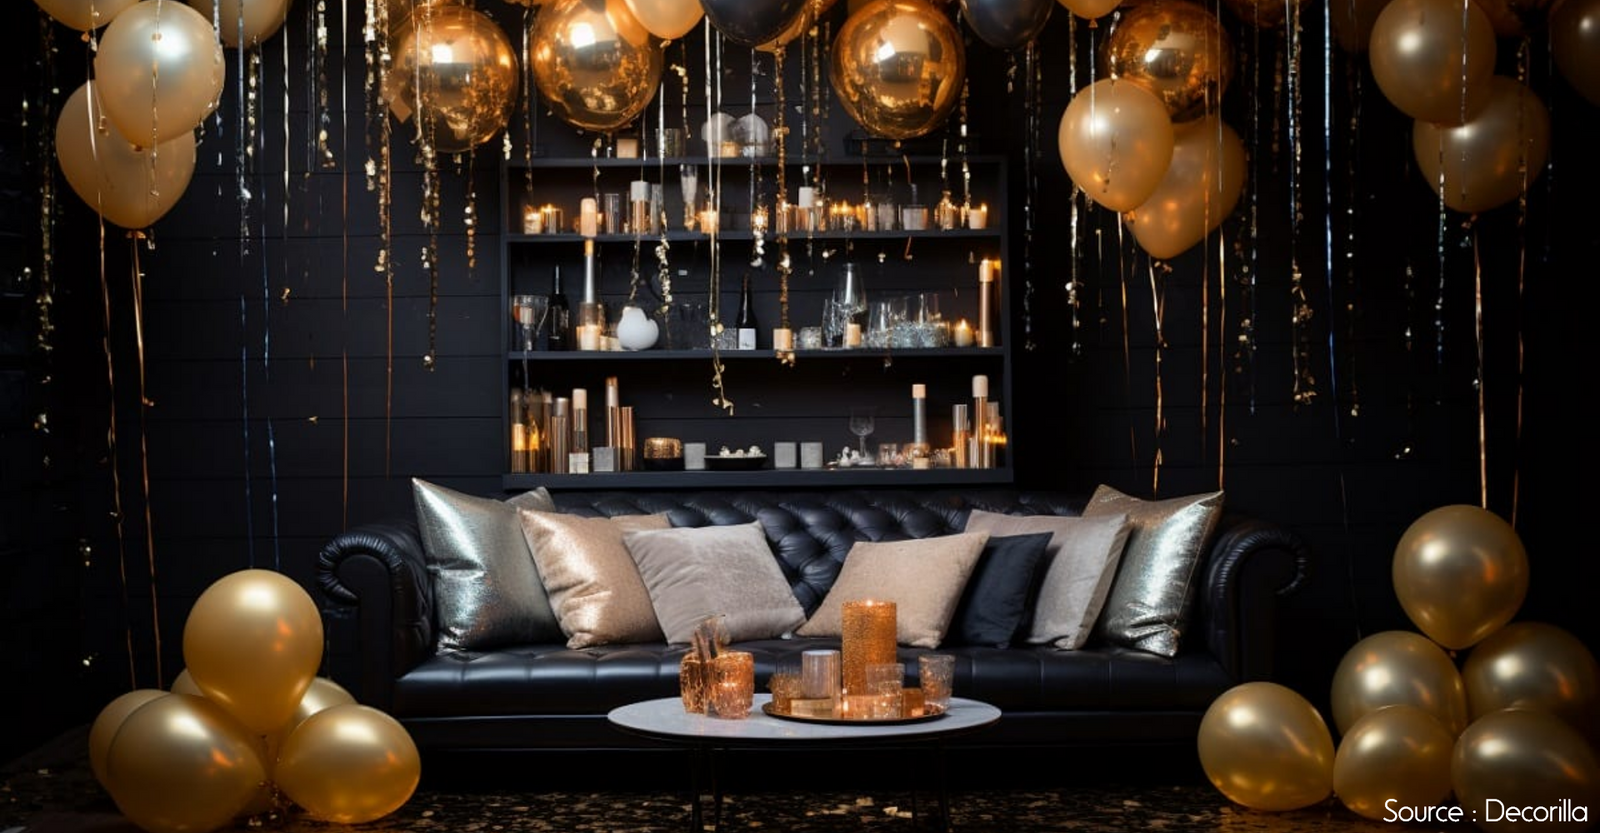 Try Out These Amazing New Year's Eve Decorations